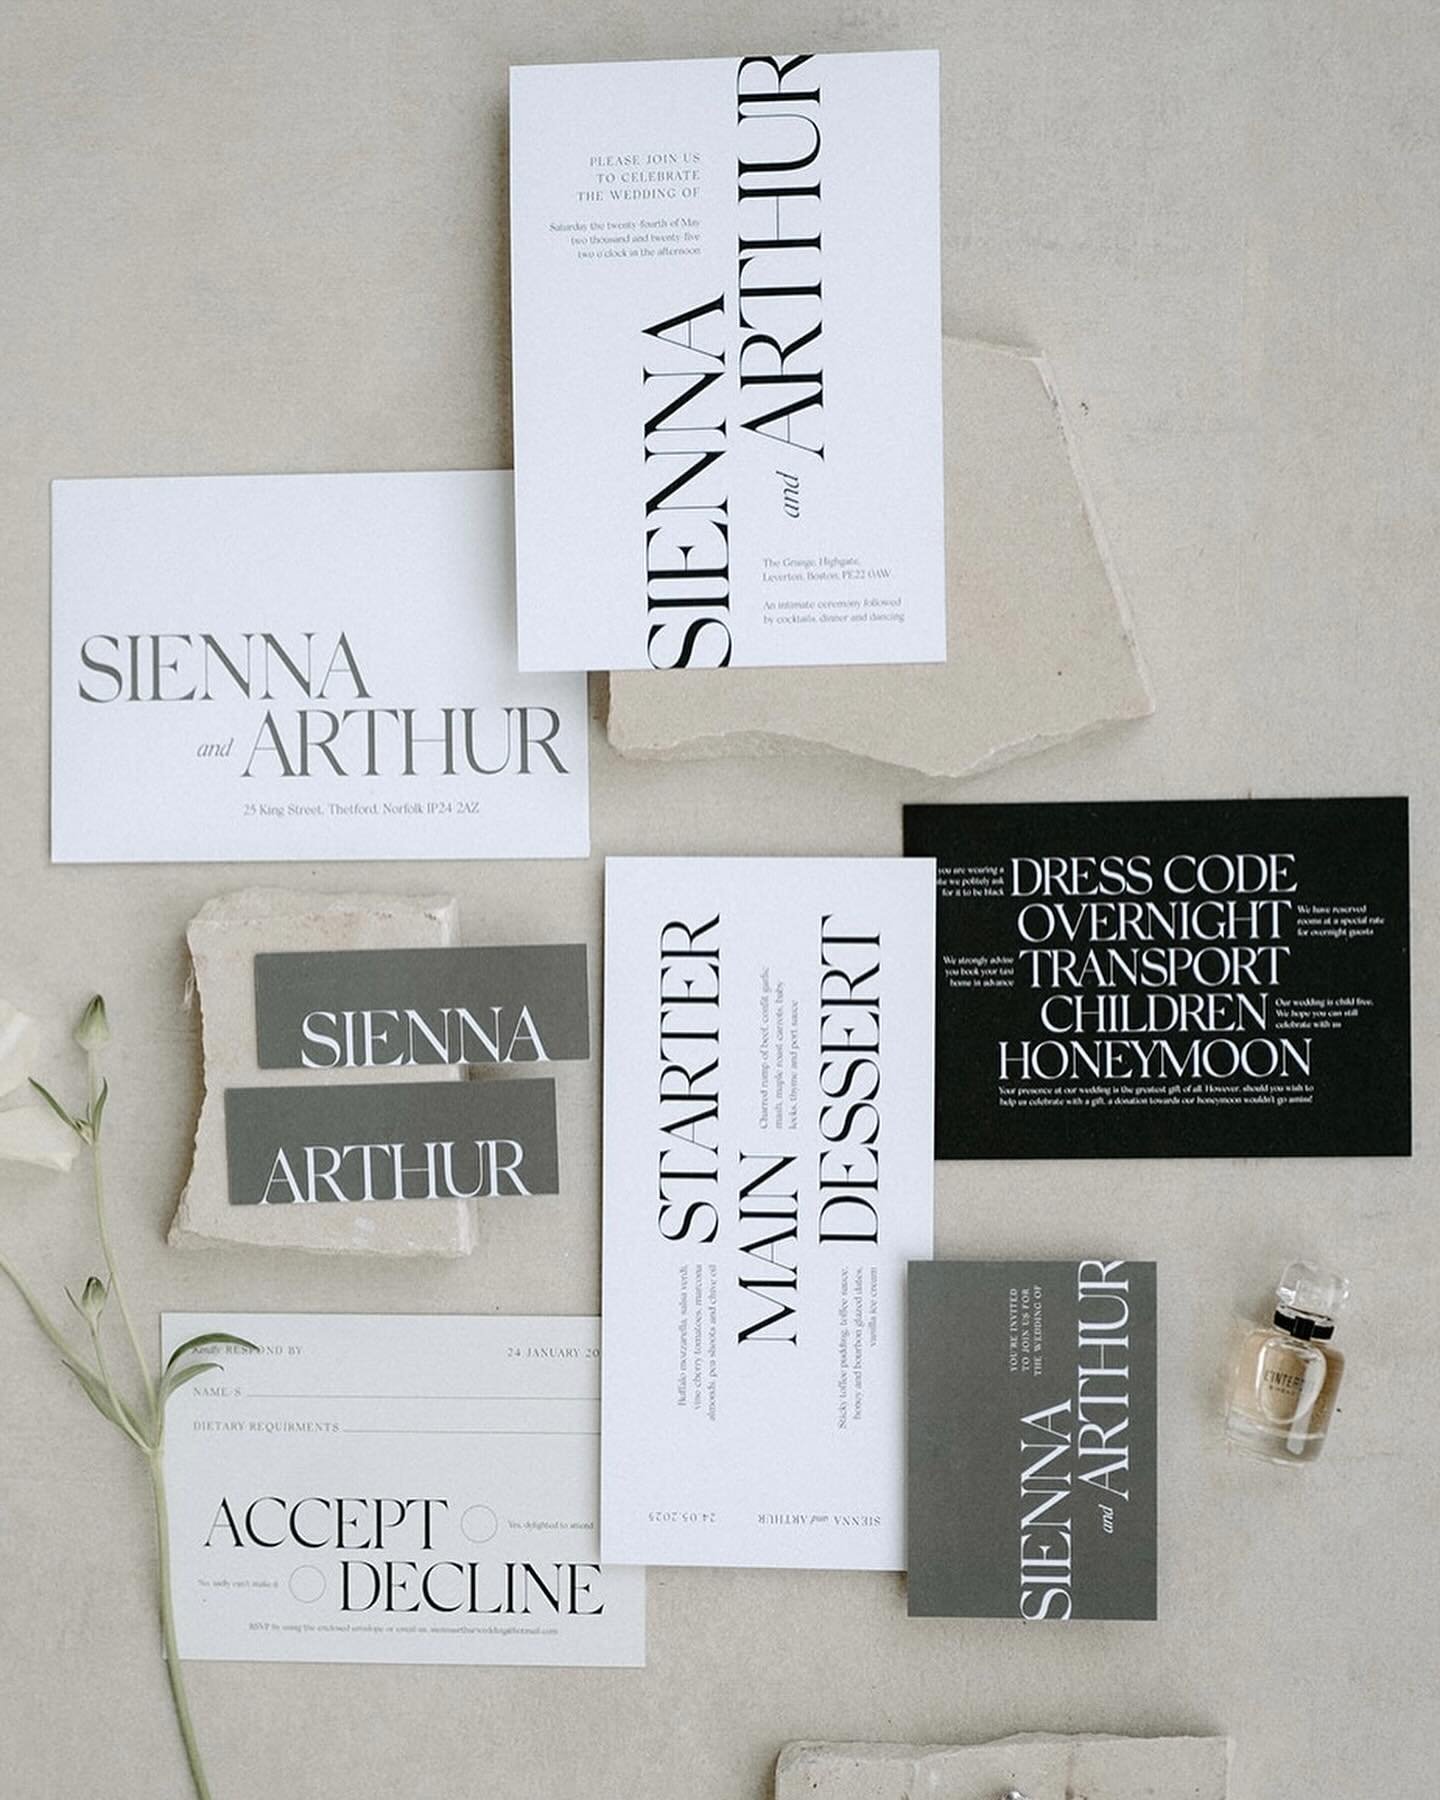 Featuring the all new orchid luxe collection stationery available to order now! 🤍🖤

Paper Stationery &amp; Signage: @theluxepaperco
Concept &amp; Photographer: @bethberesfordphotography
Venue: @thestoryofthegrange
Concept, Stylist, Prop Hire &amp; 